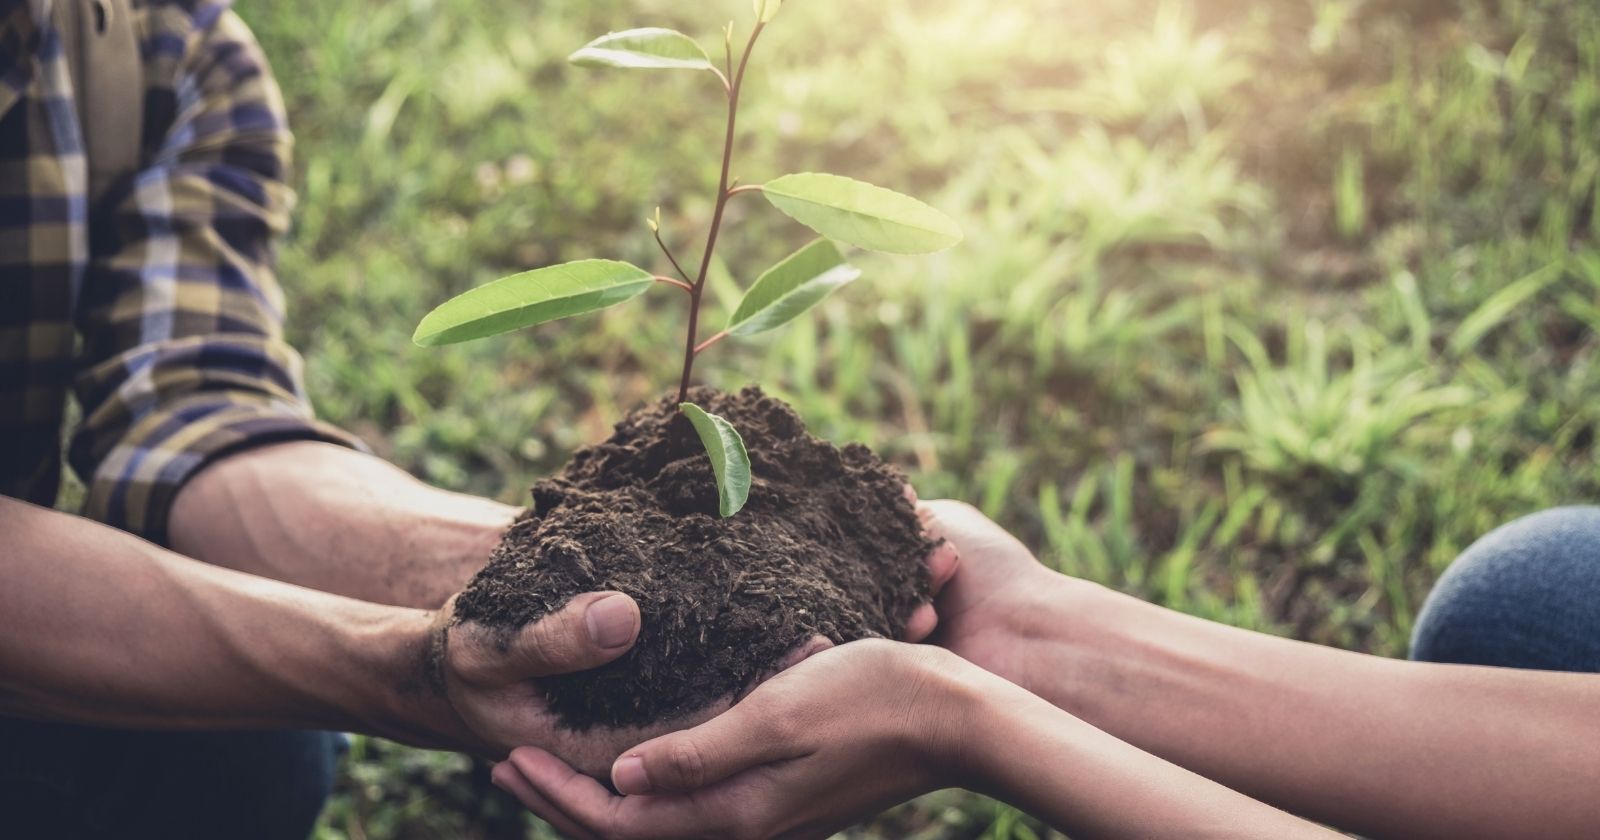 What if you involved your teams in a connected challenge dedicated to reforestation?